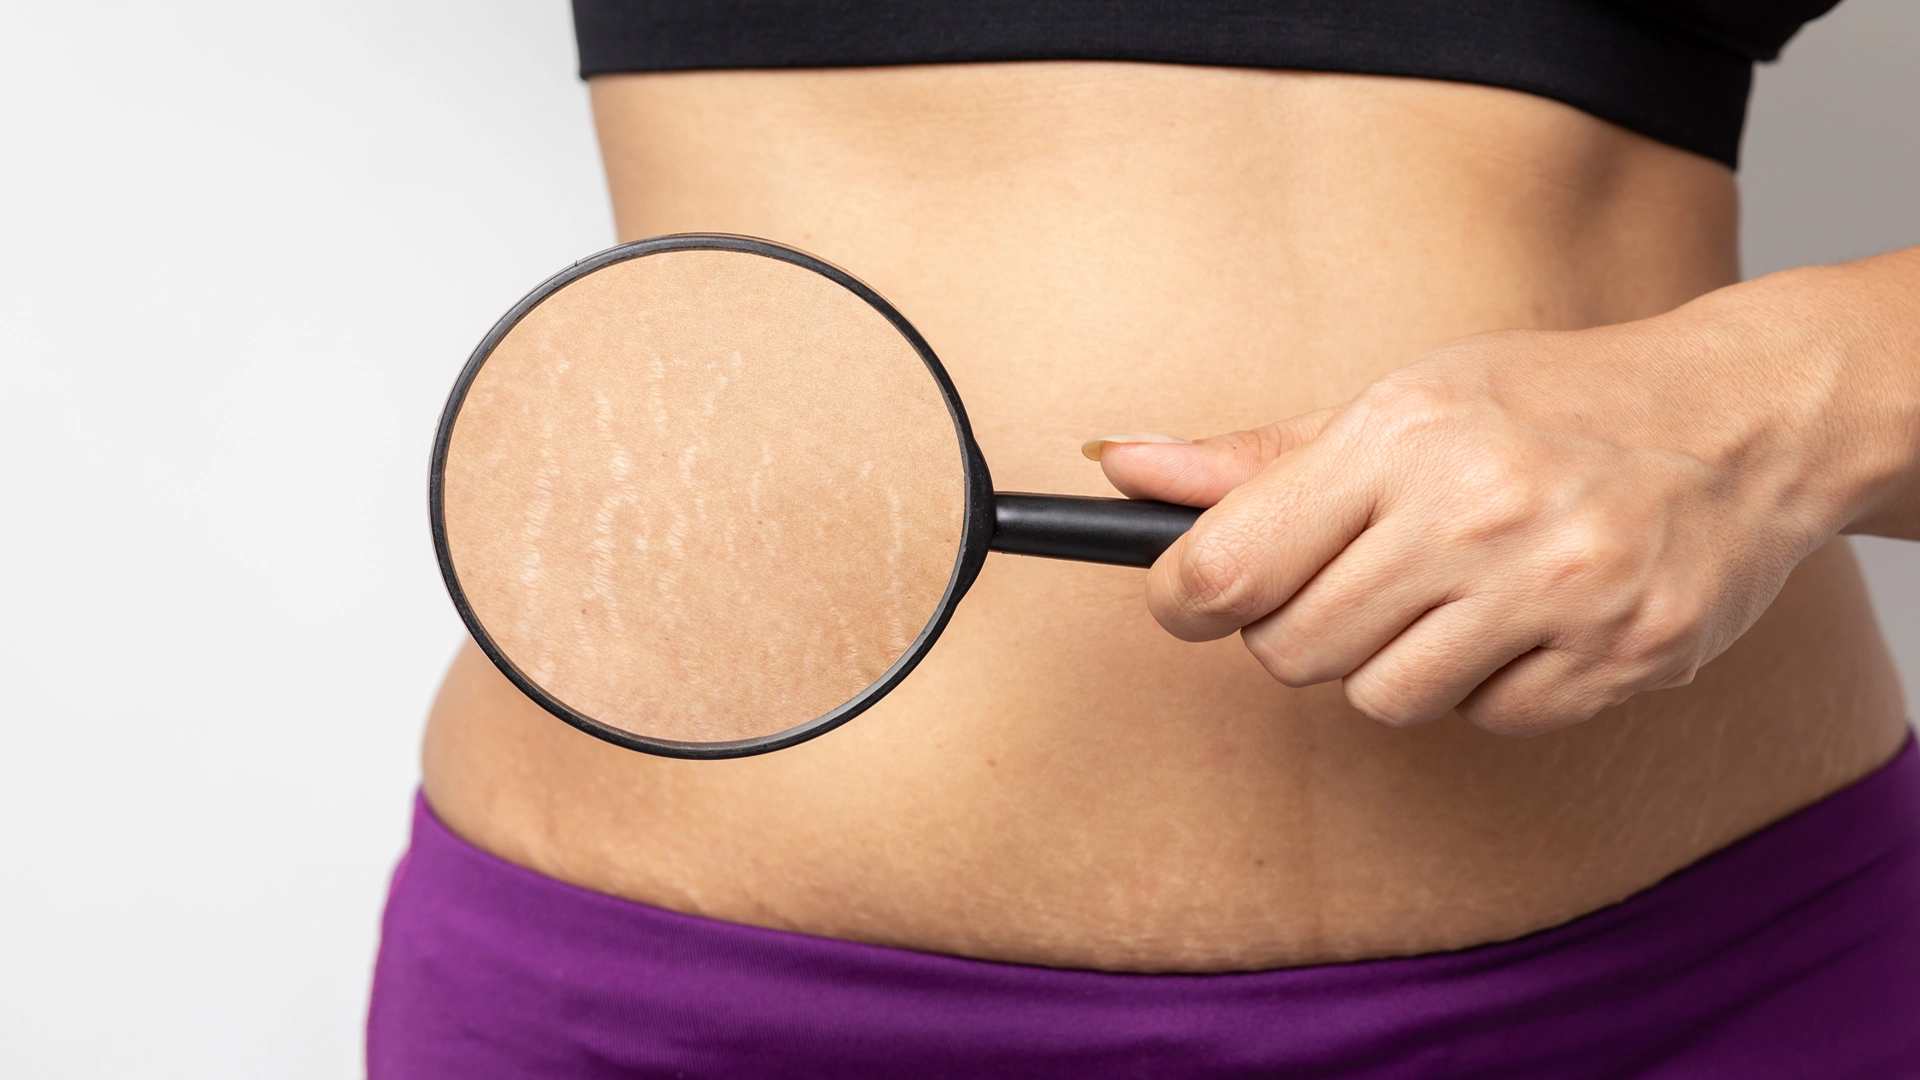 Stretch Marks During Pregnancy? This Cutting-Edge Tech May Help You